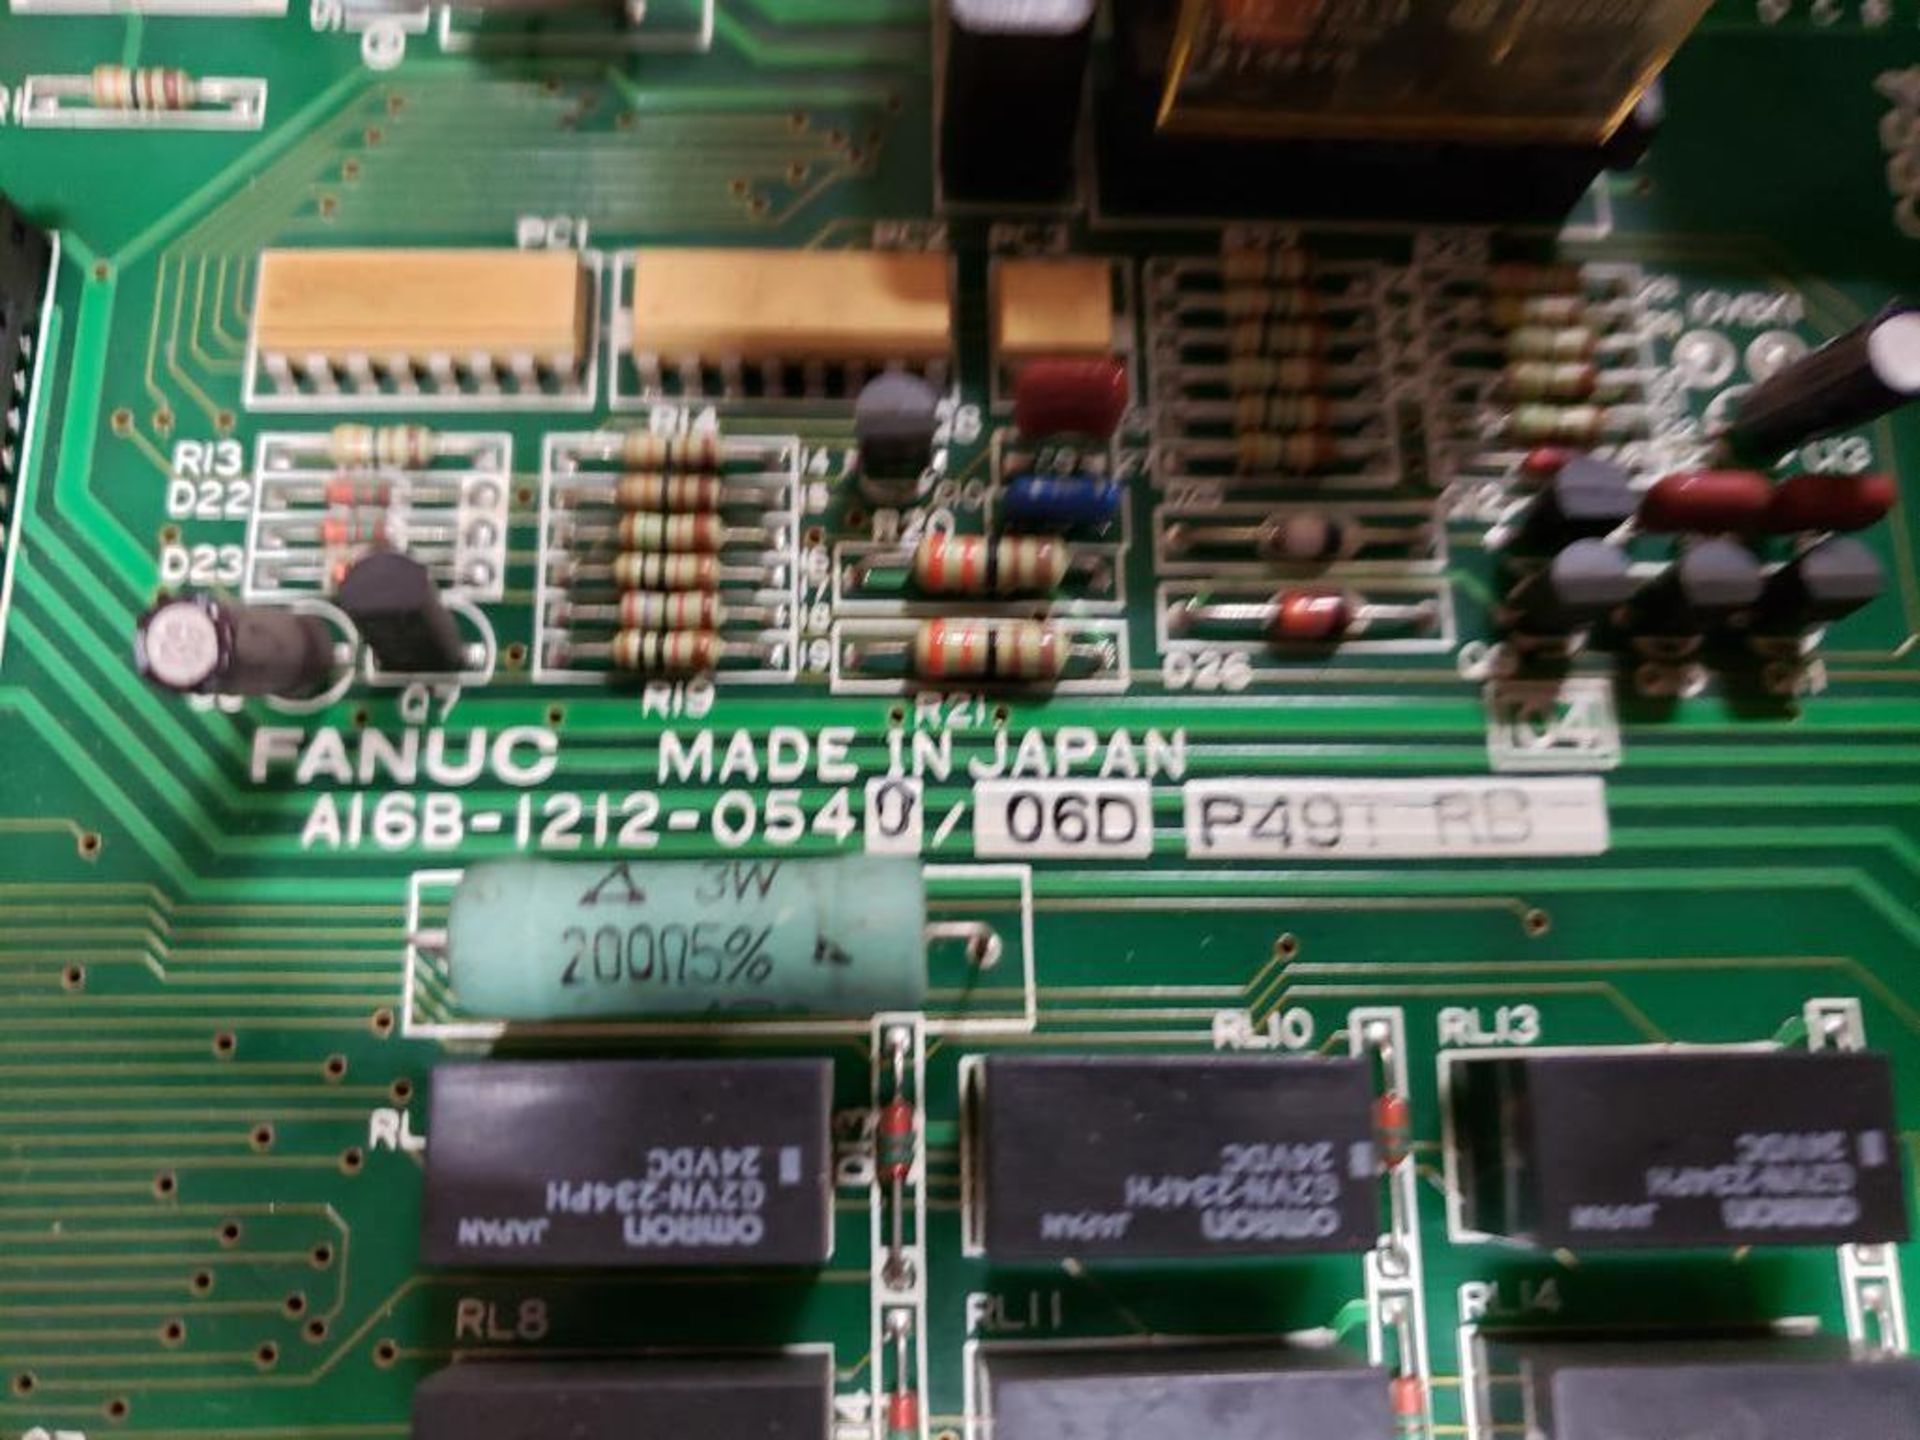 Fanuc control board. Part number A16B-1212-0540/06D. - Image 3 of 3